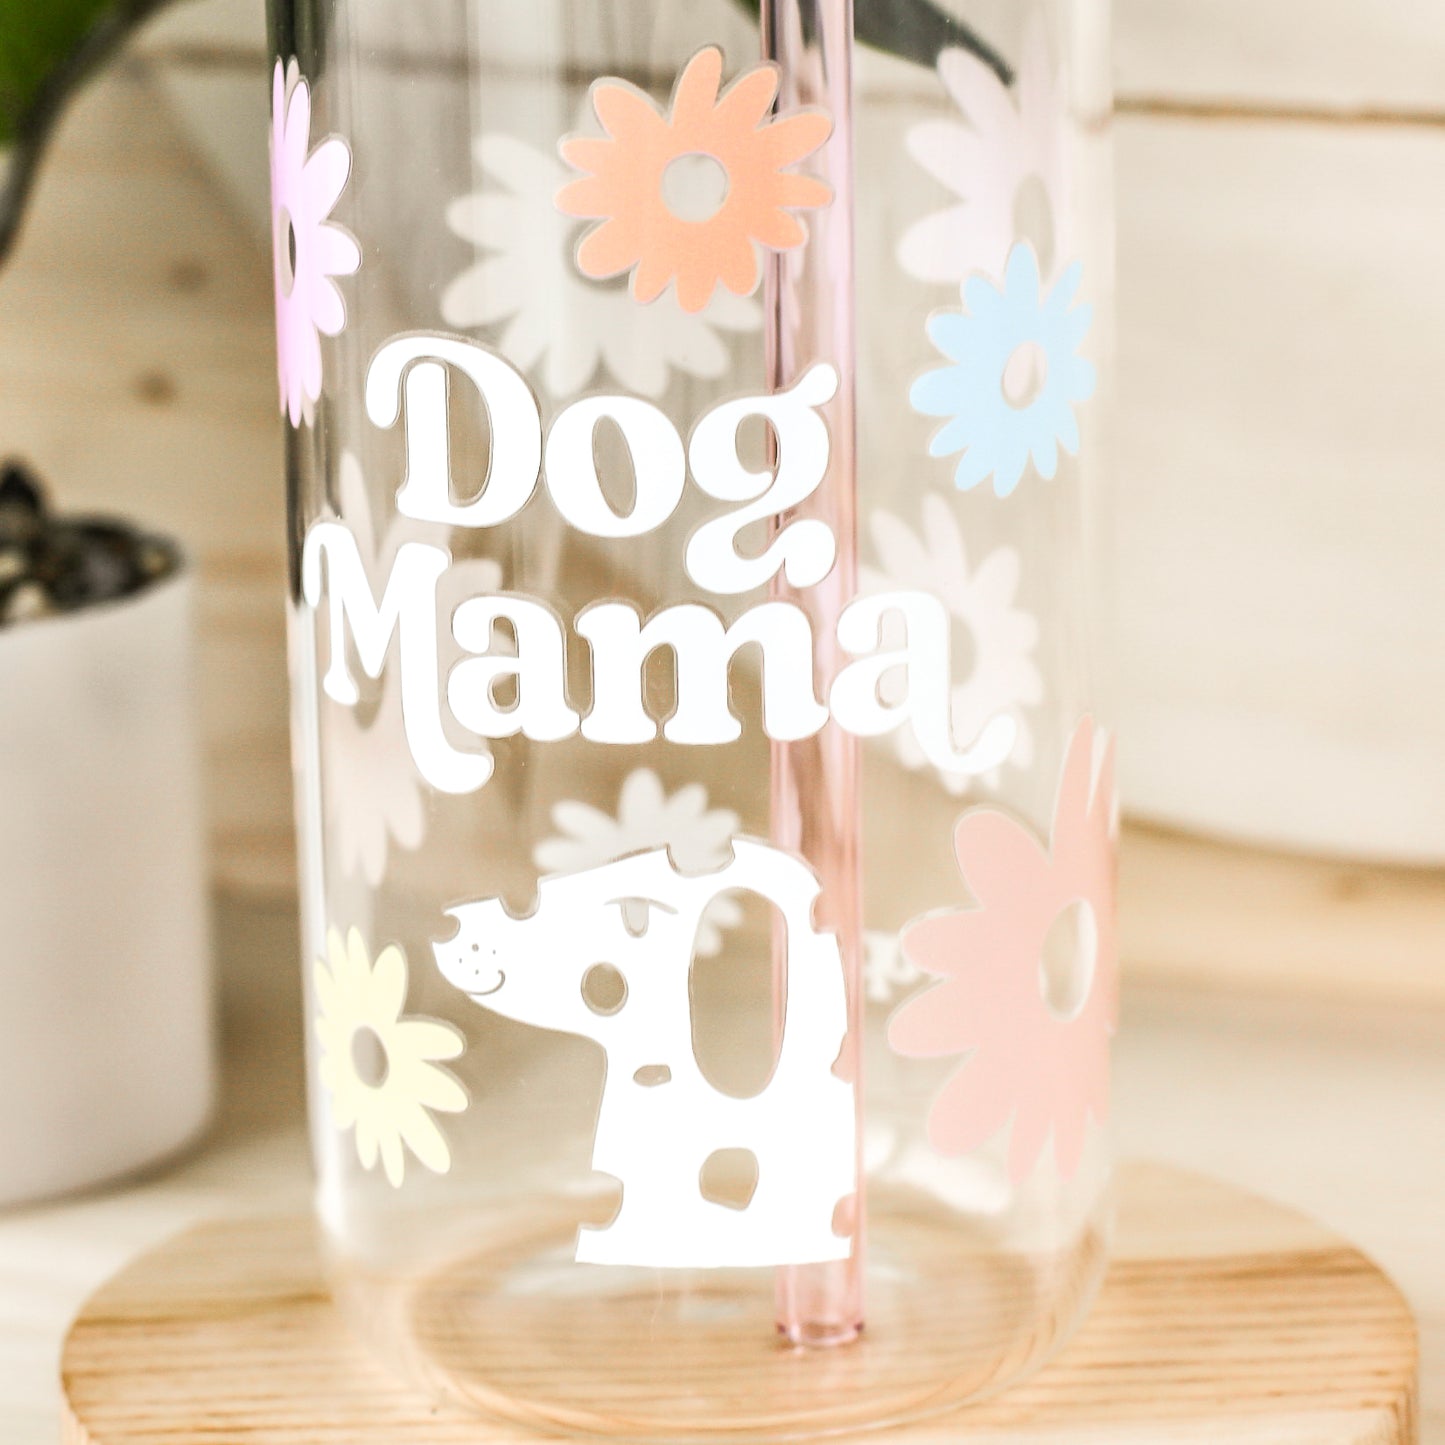 Dog Mama Dog Mom Life Beer Glass with UV DTF transfers  Bamboo Lid  Colored Glass Straw Flower Daisy Pet Theme cups